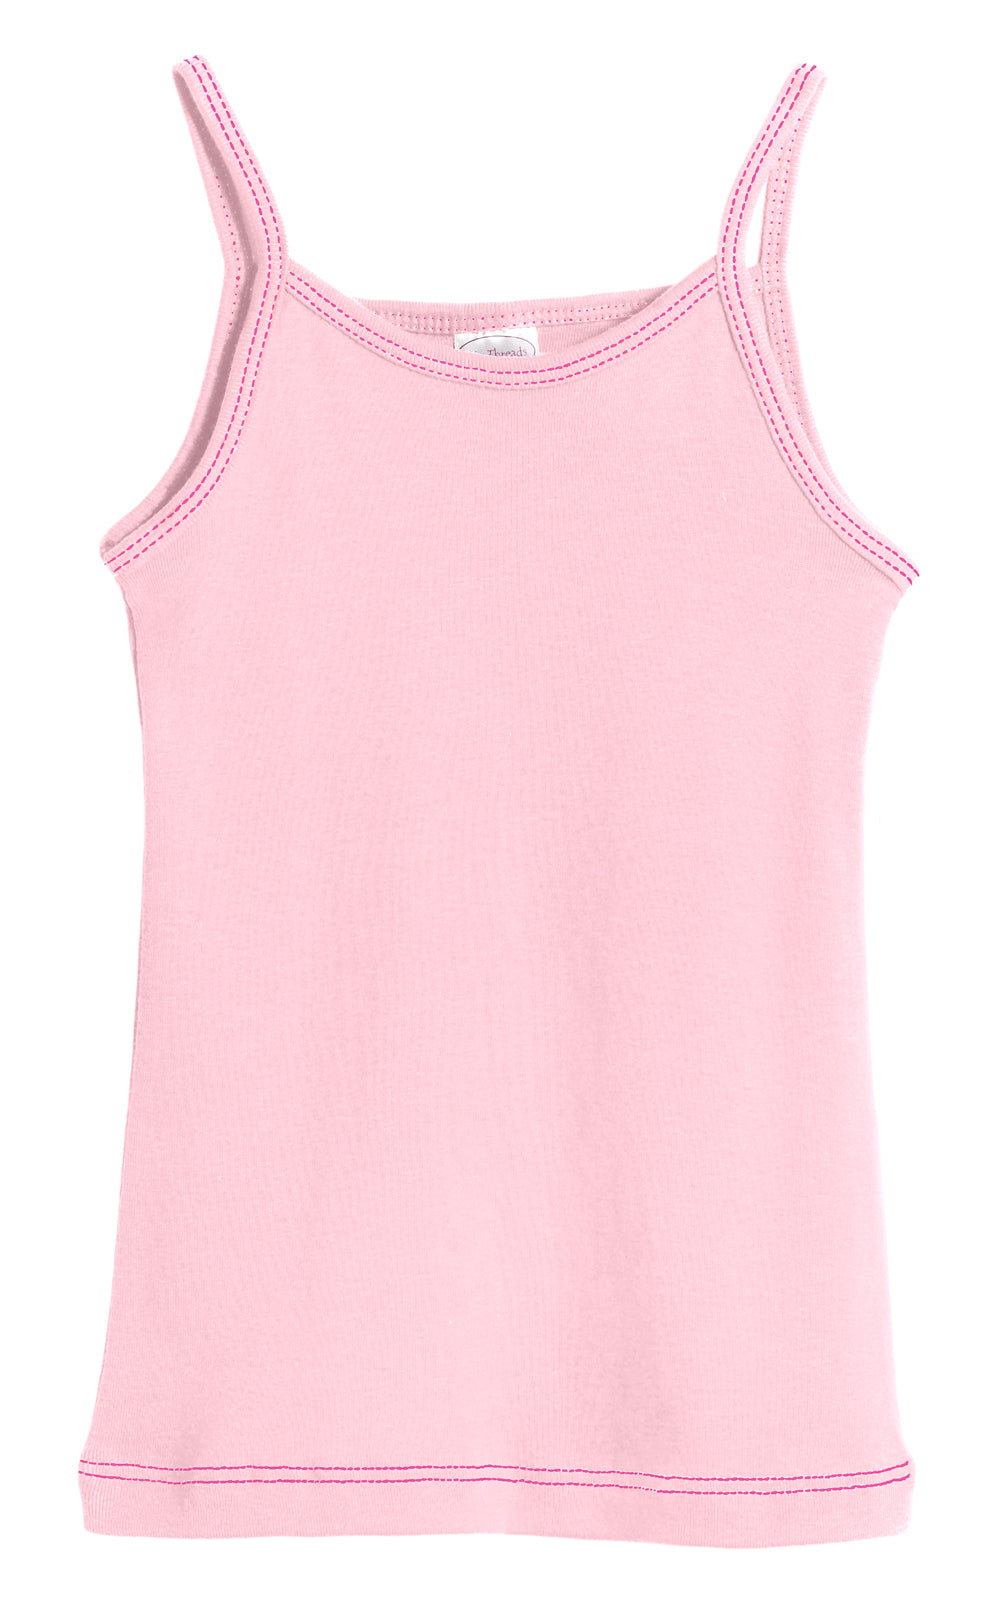 Buy Look&Took Regular Size Stretch Cotton Samij Camisole for Girls